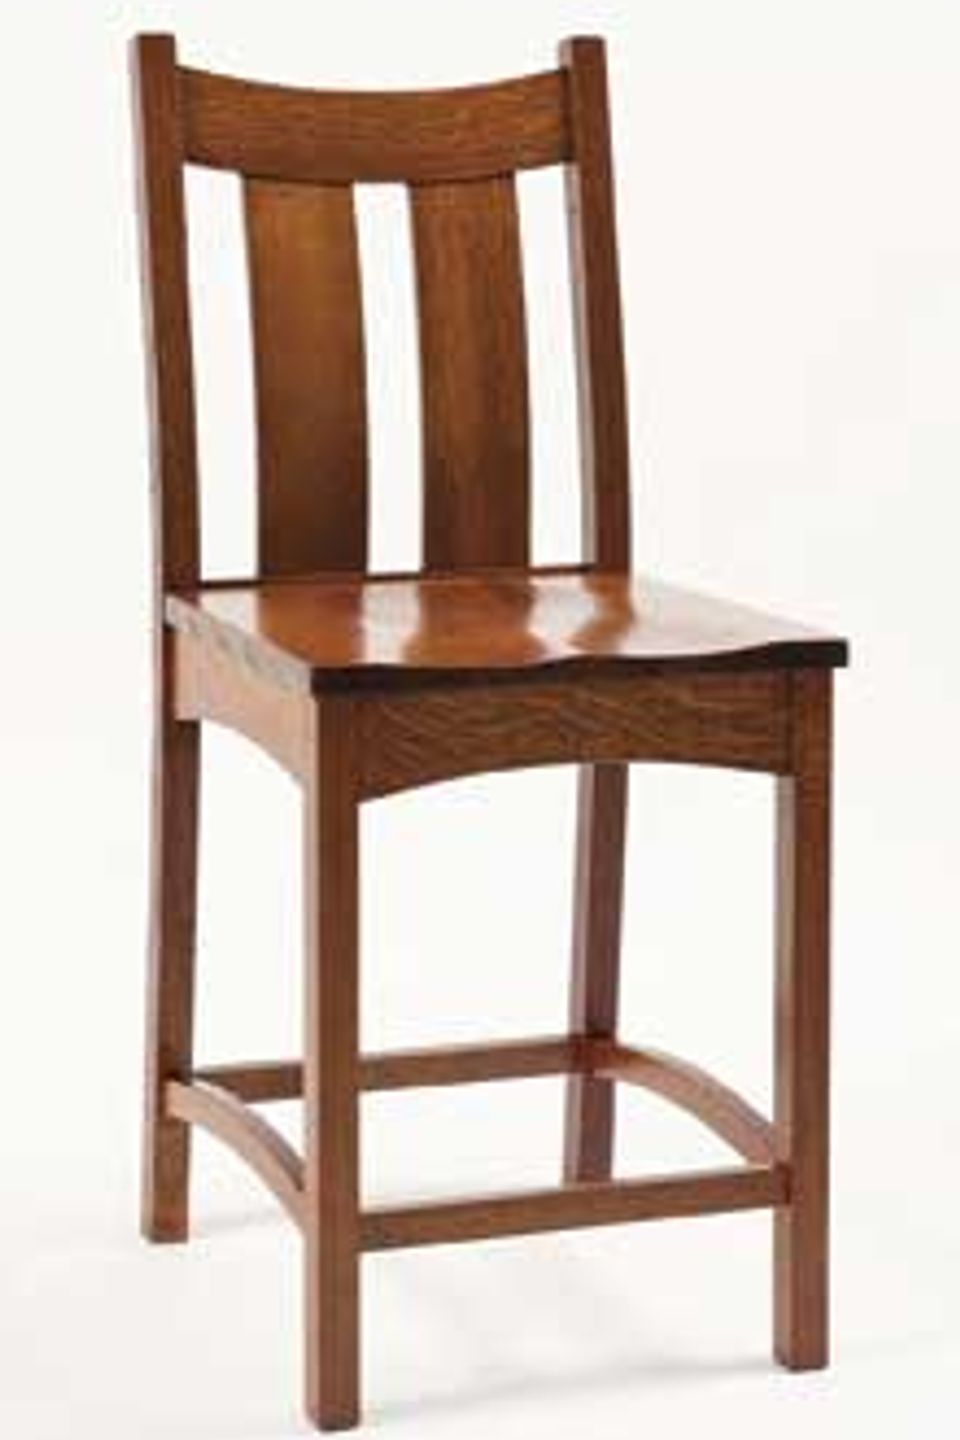 Wwc countryshaker barchair